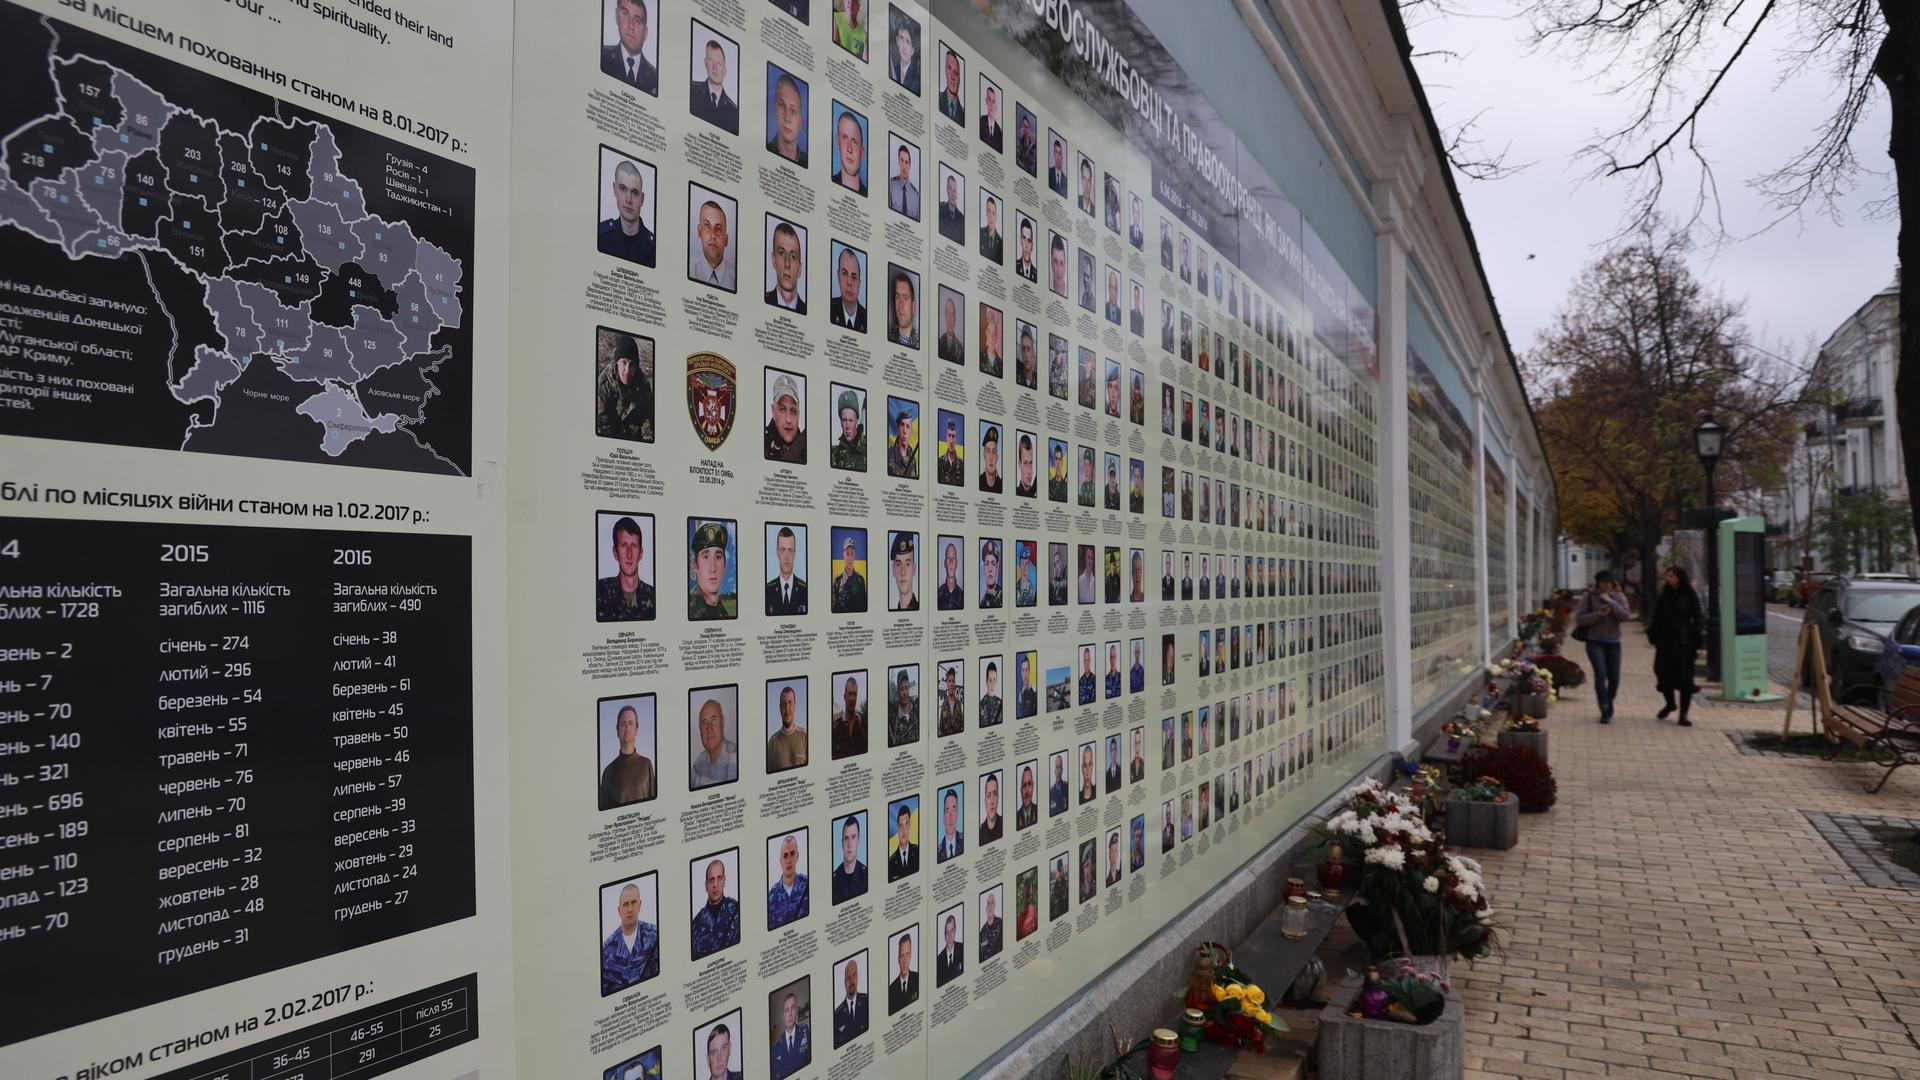 Circumscribing the St. Michael's monastery grounds in Kyiv, Ukraine, is a wall of portraits of soldiers.